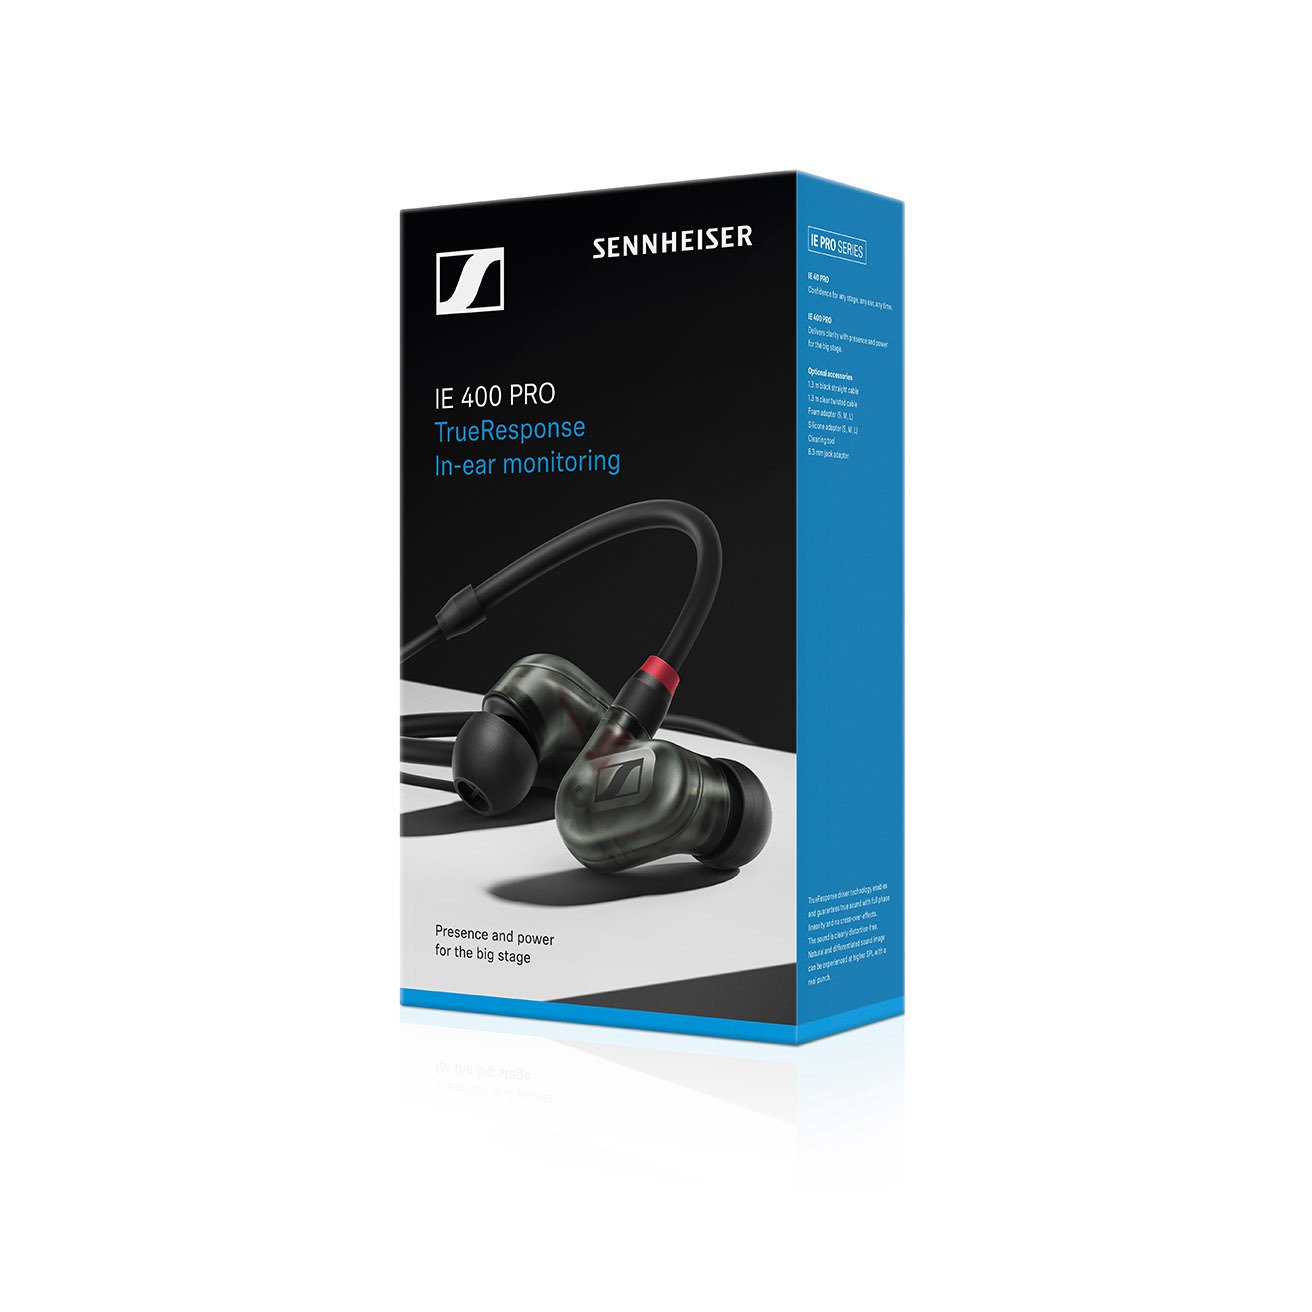 Sennheiser Ie 400 Pro Smoky Black - Ecouteur Intra-auriculaire - Variation 3